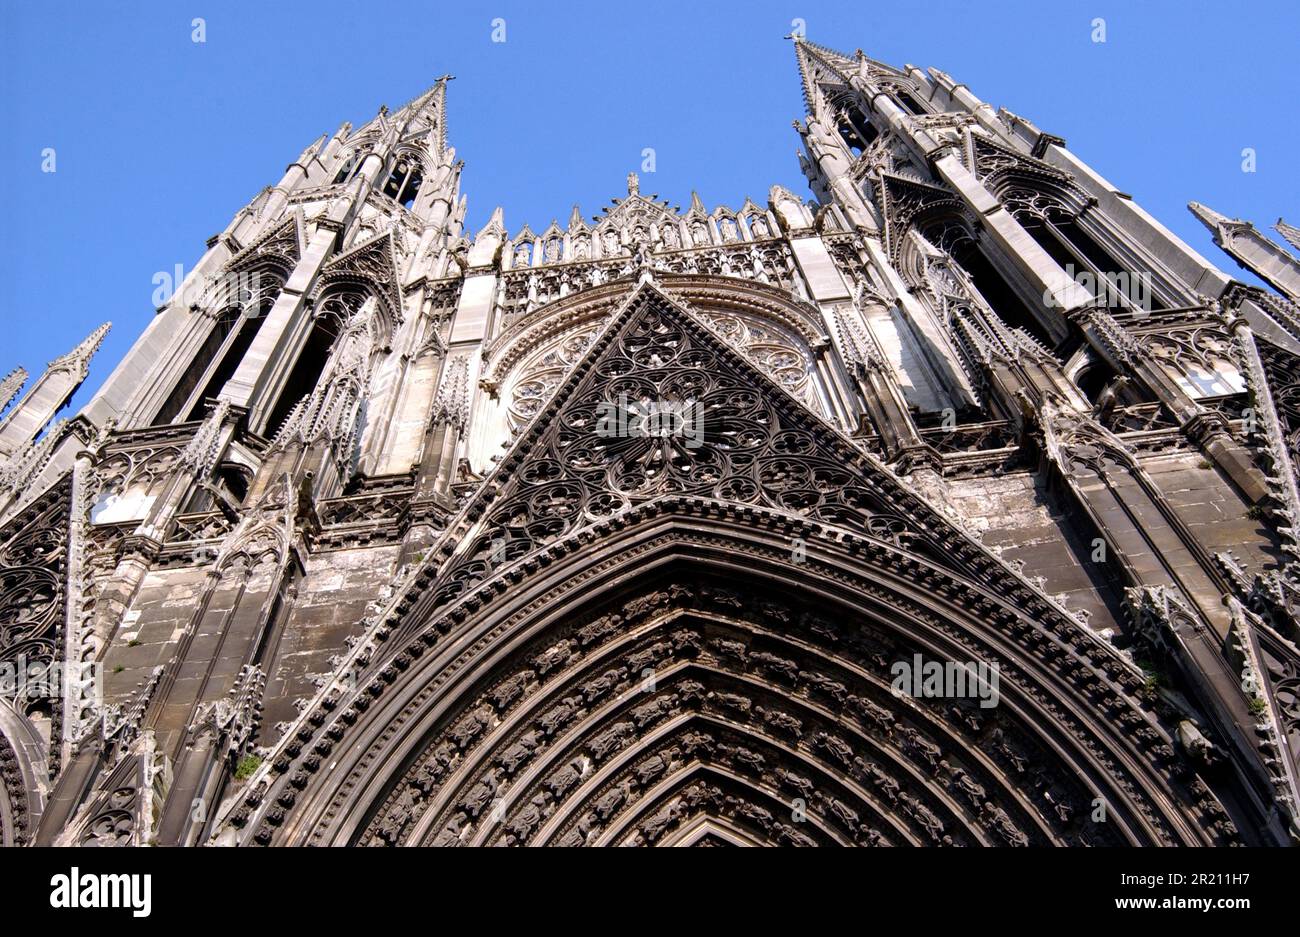 Photograph showing the exterior of the Church of Saint-Maclou, a Roman Catholic church in Rouen, France. Stock Photo